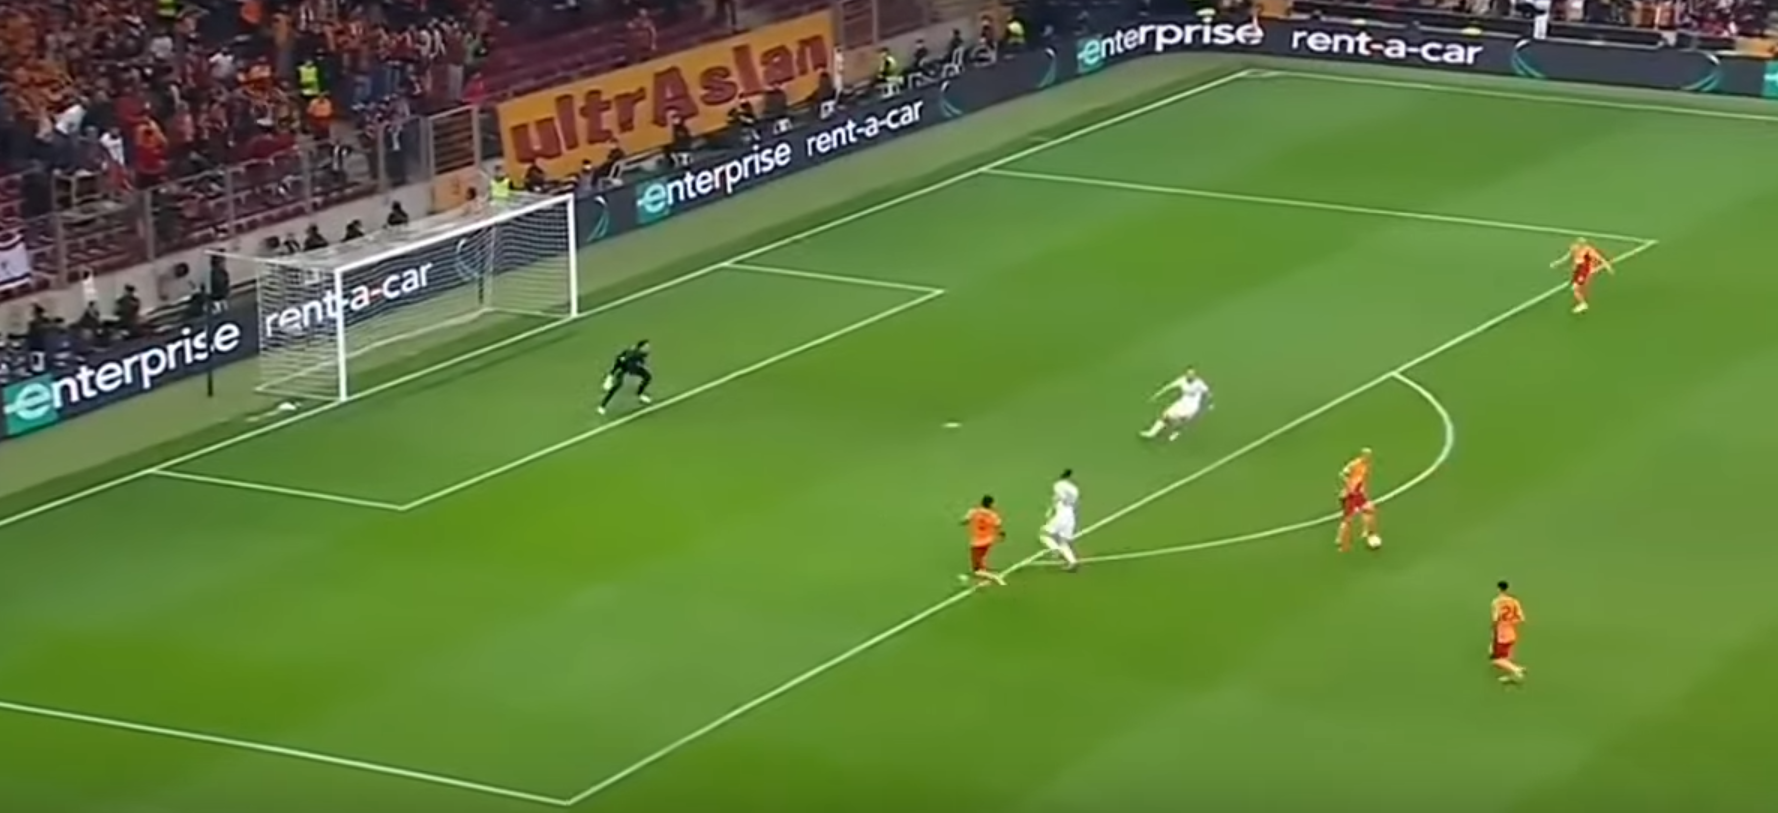 Galatasaray player receiving the ball in space, back to goal, 25 yards out